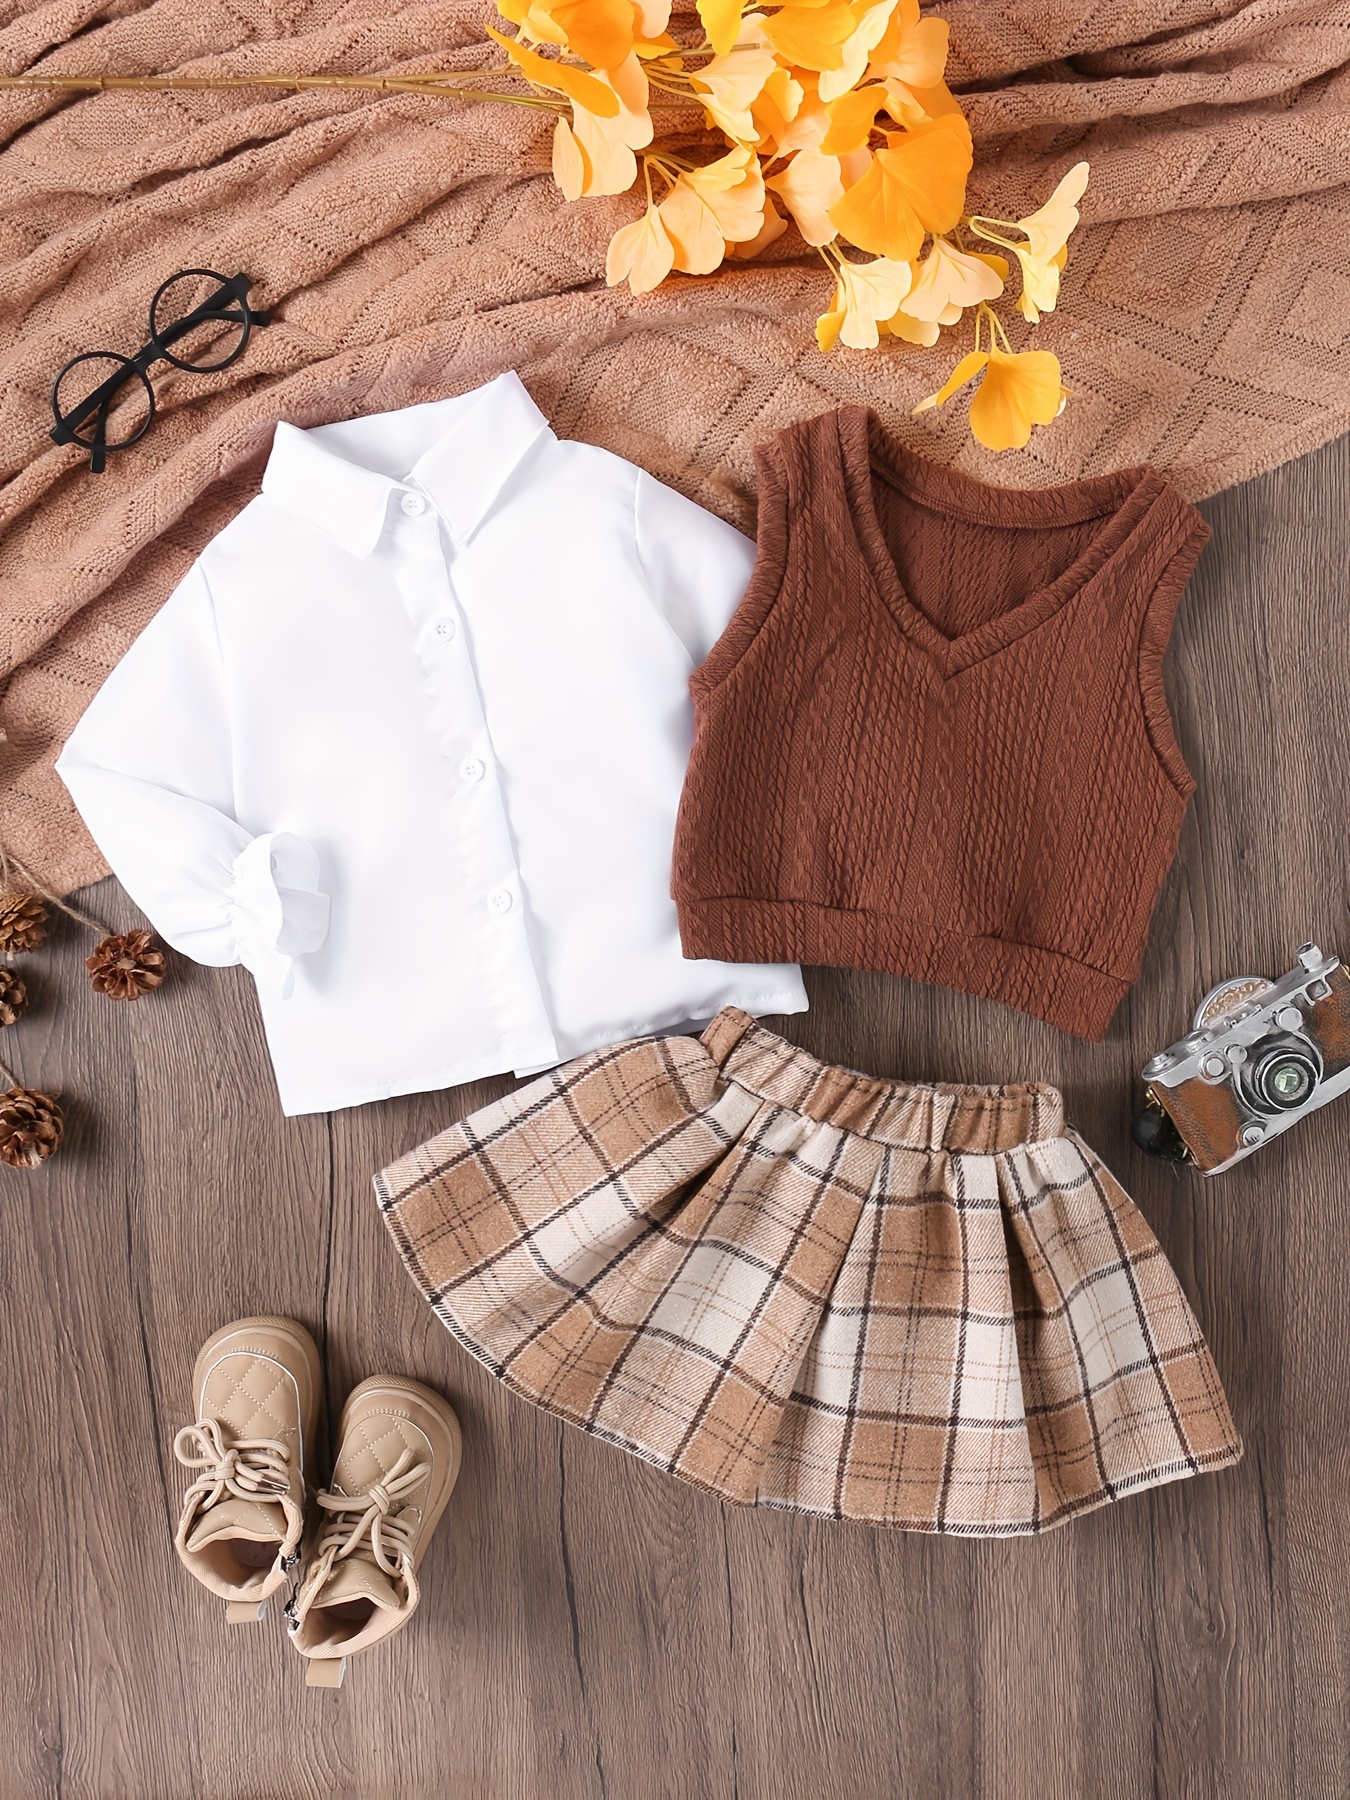 3pcs Girl's Preppy Style Outfit, Jacquard Vest & Shirt & Plaid Pattern  Skirt Set, Toddler Kid's Clothes For Spring Autumn